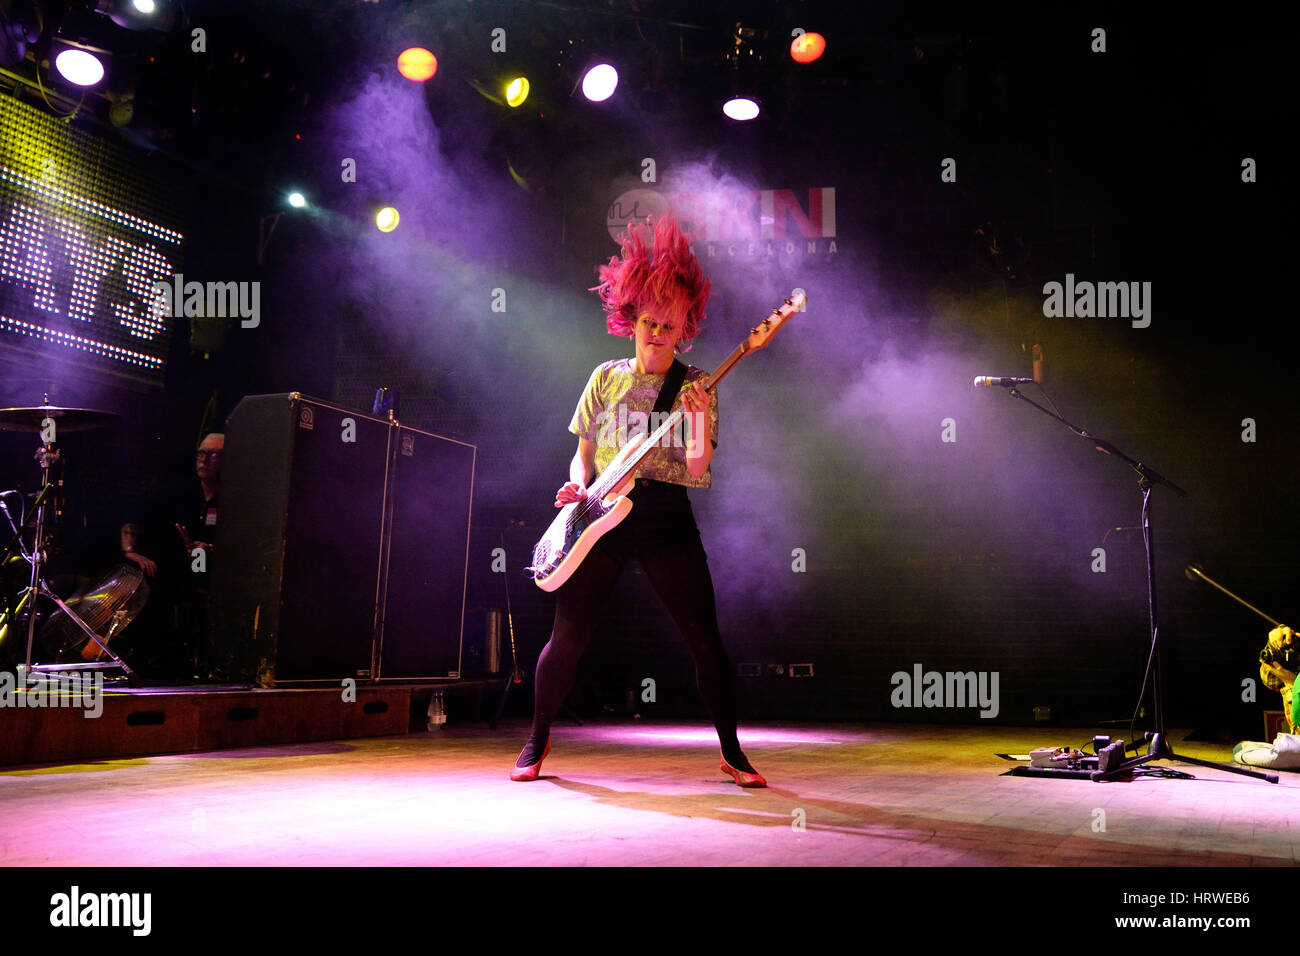 BARCELONA - MAR 18: The Subways (rock band) performs at Bikini stage on March 18, 2015 in Barcelona, Spain. Stock Photo